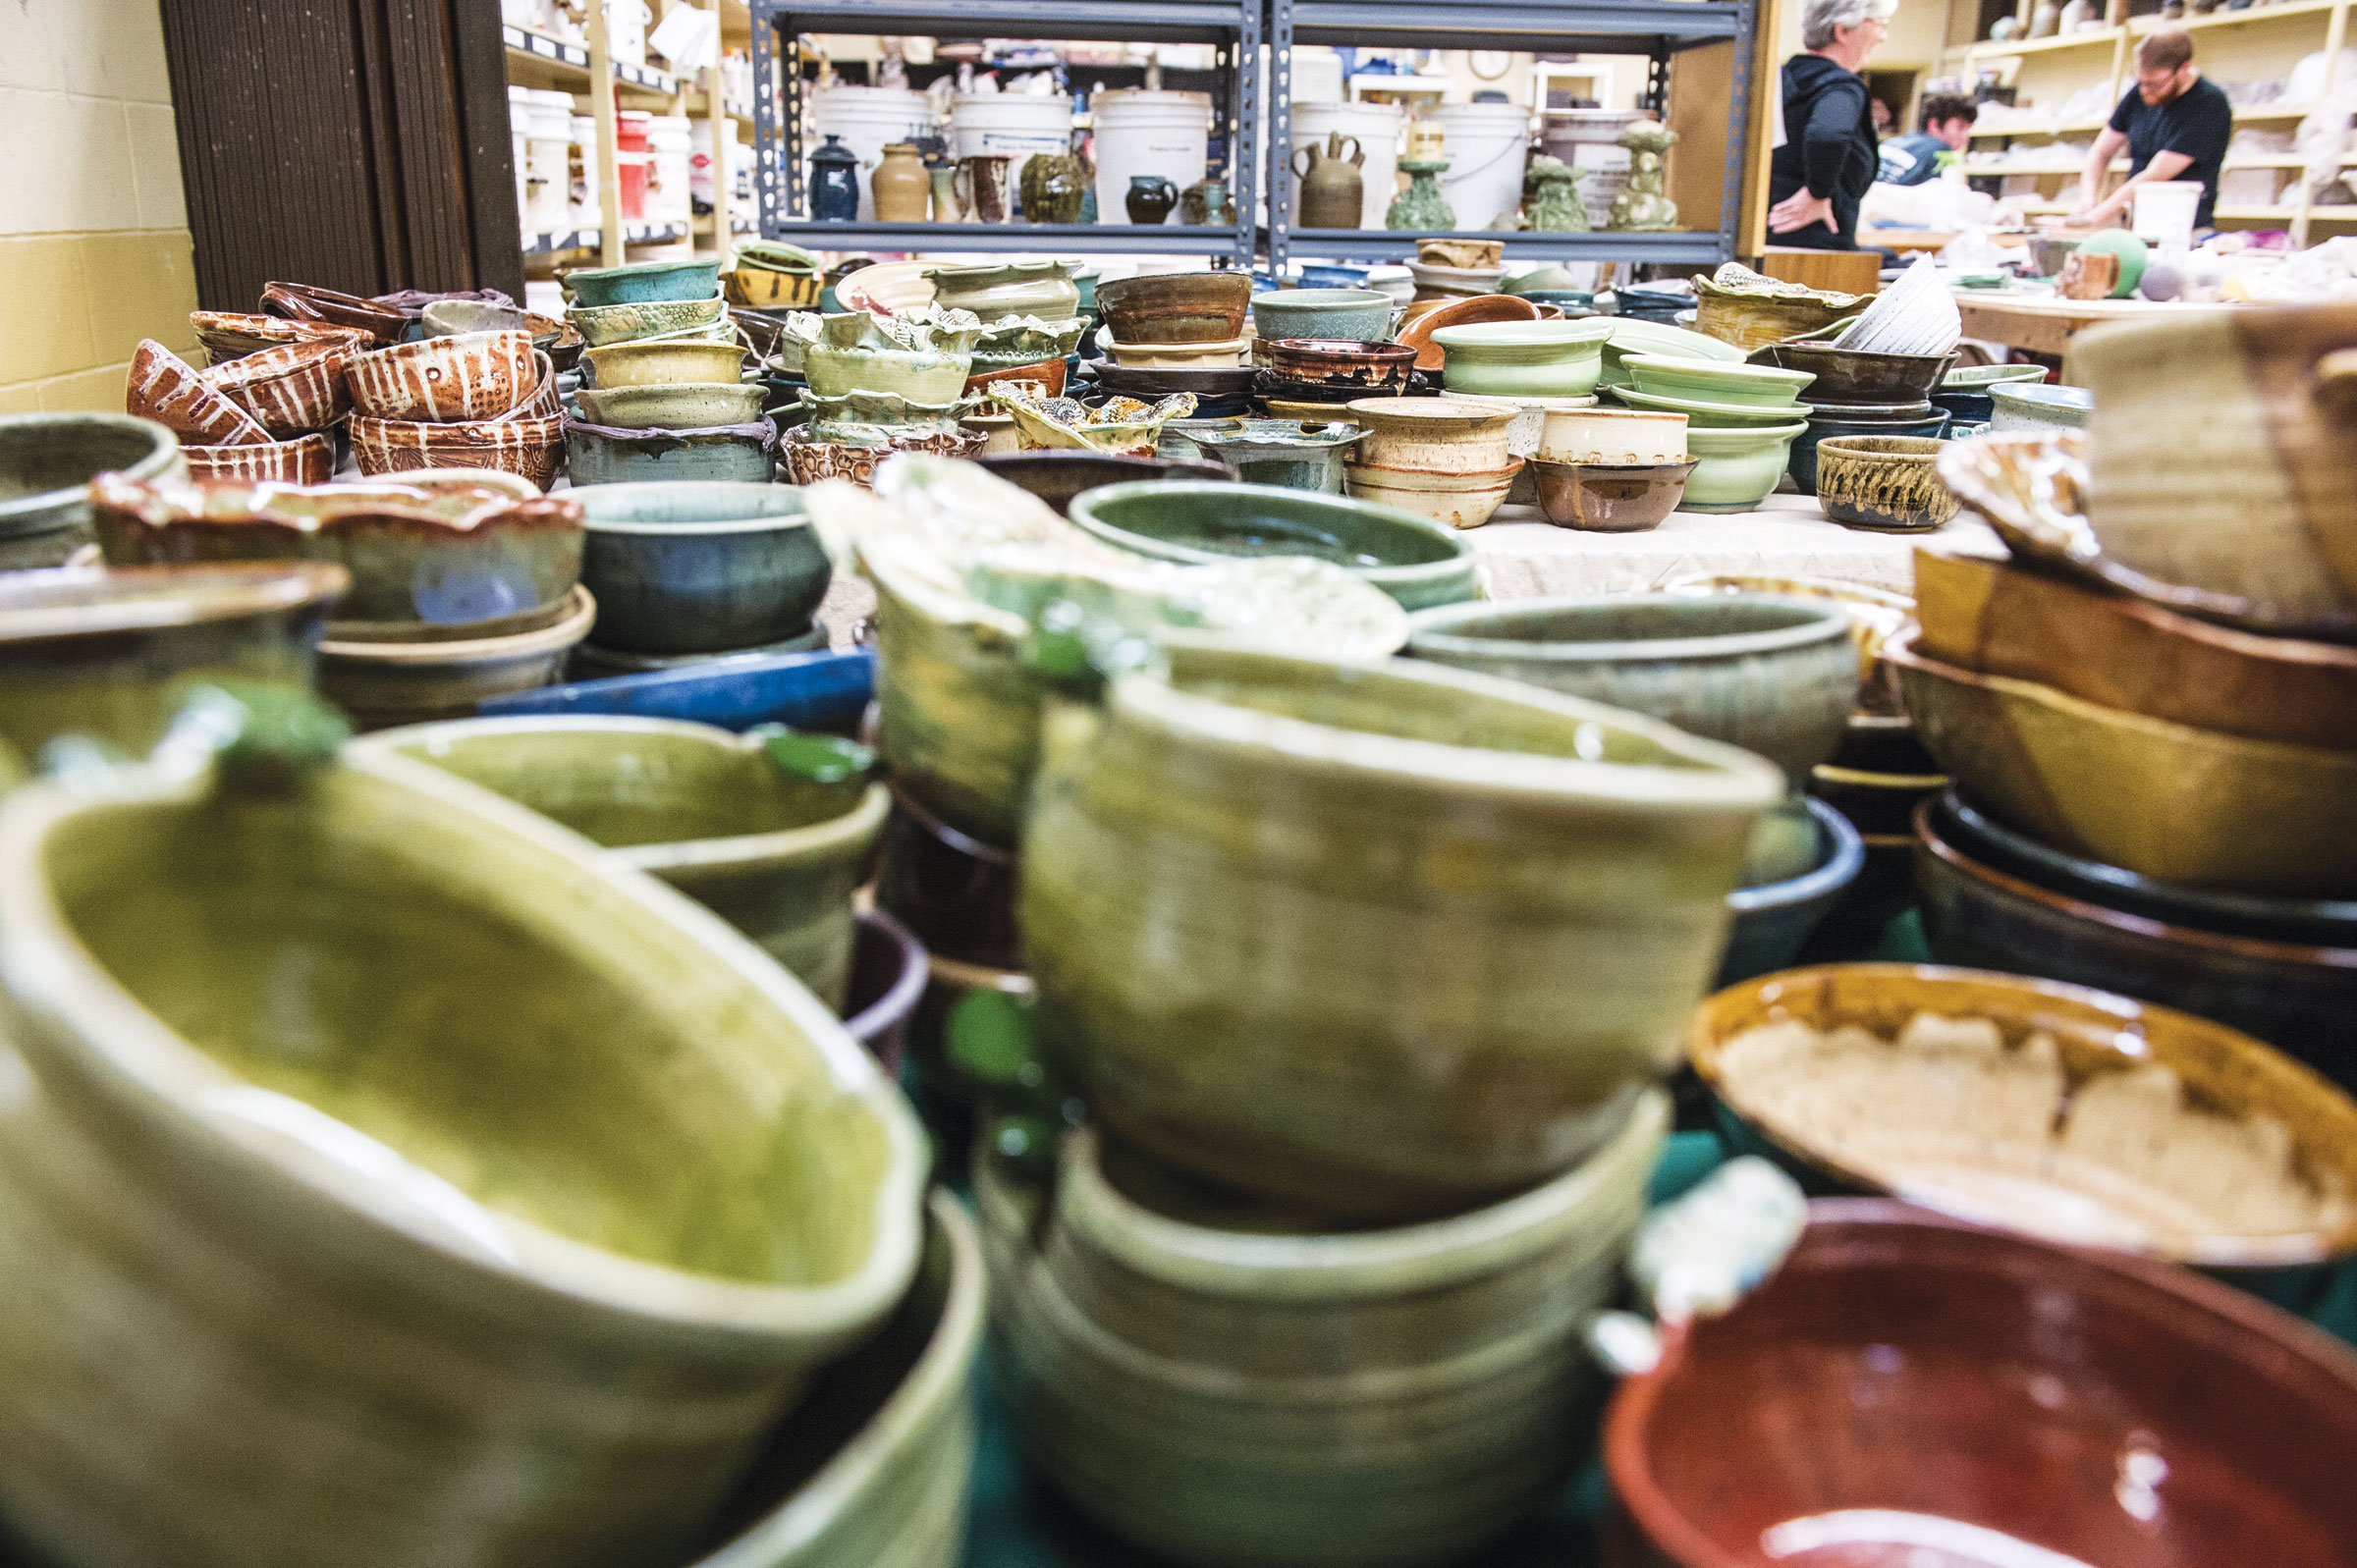 Annual ‘Empty Bowls’ event to be held Feb. 13